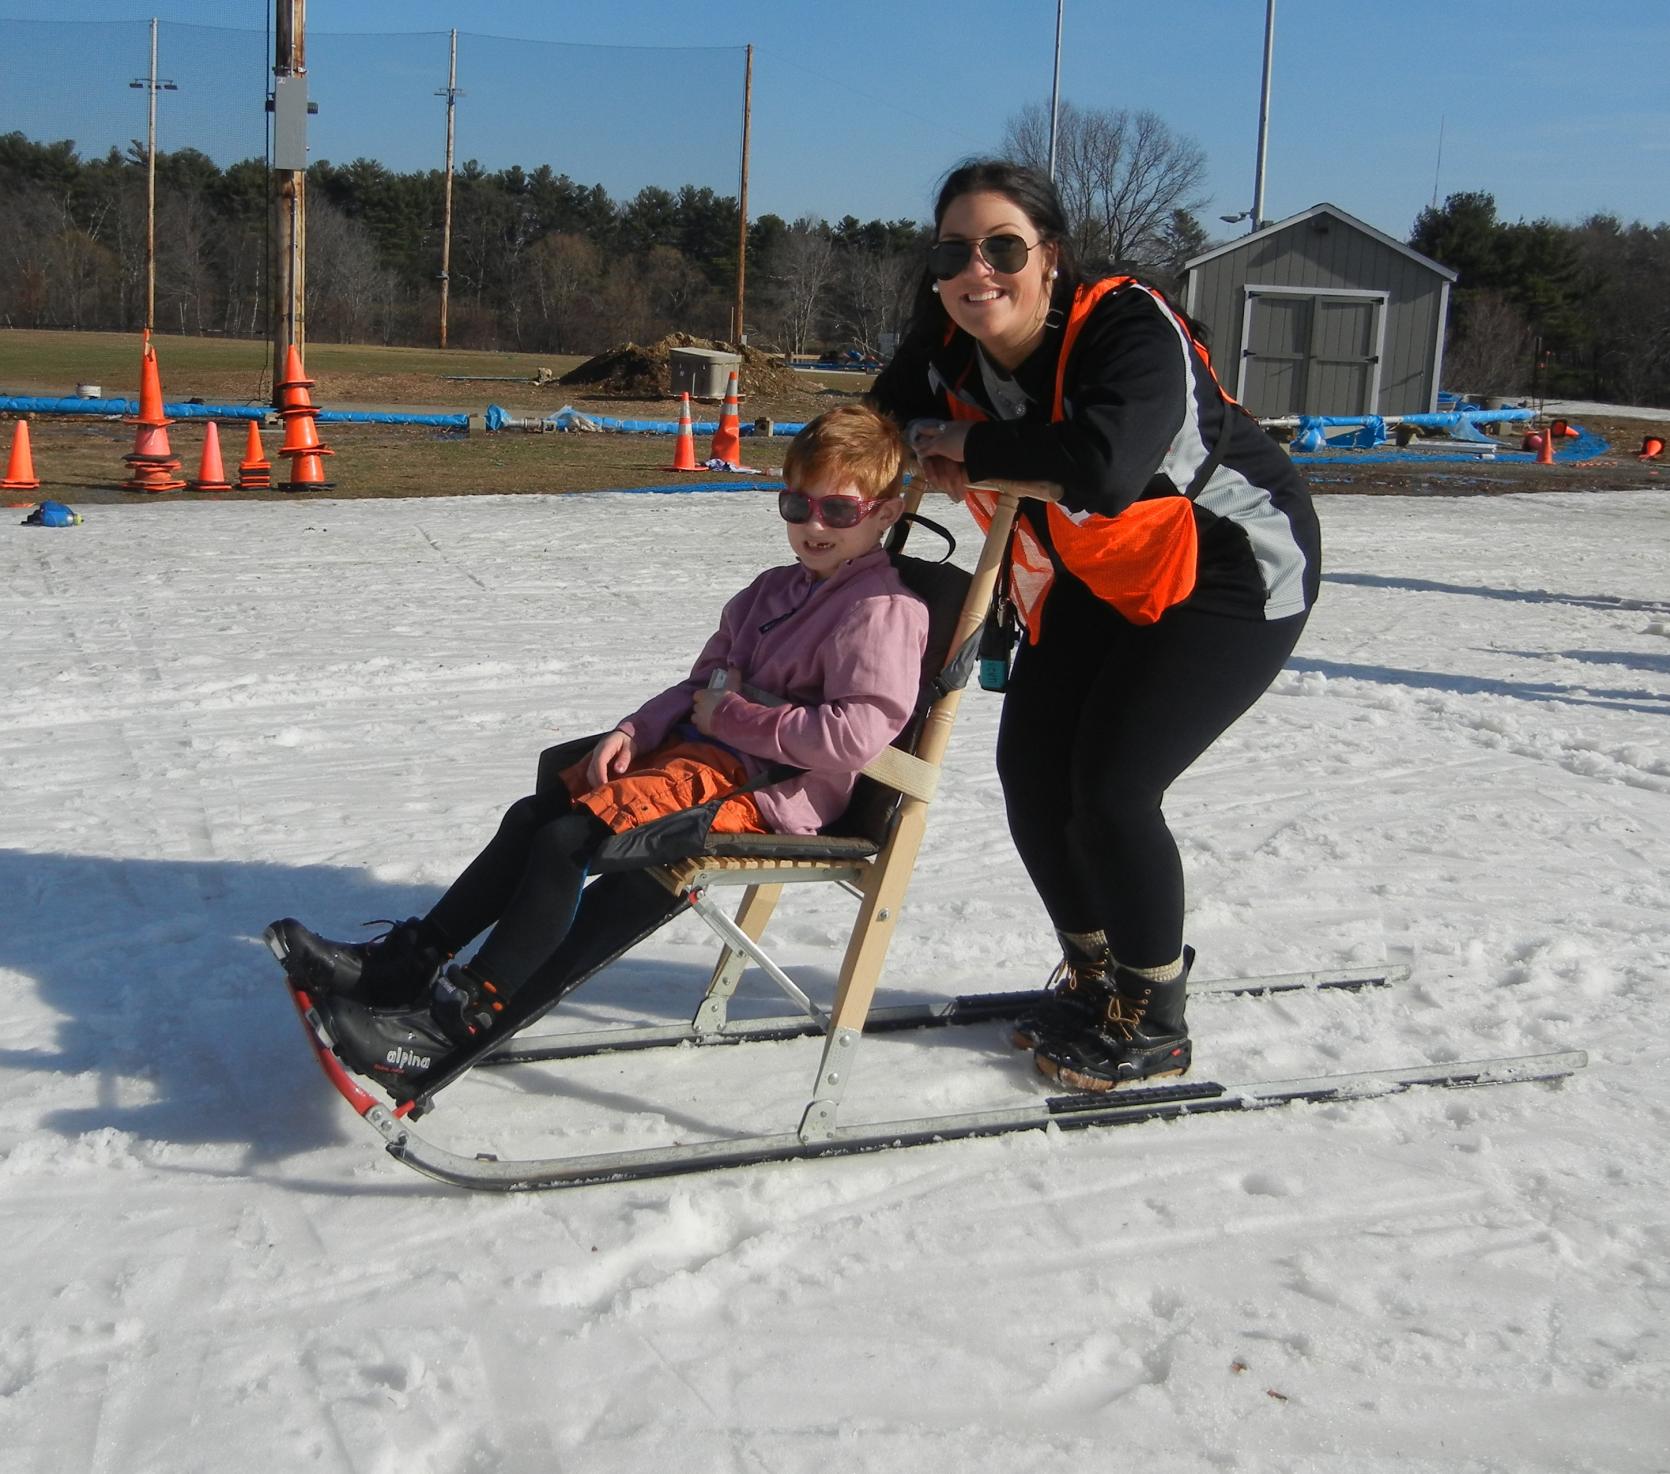 A young skier on a kick sled on a groomed trail with a volunteer standing behind them.